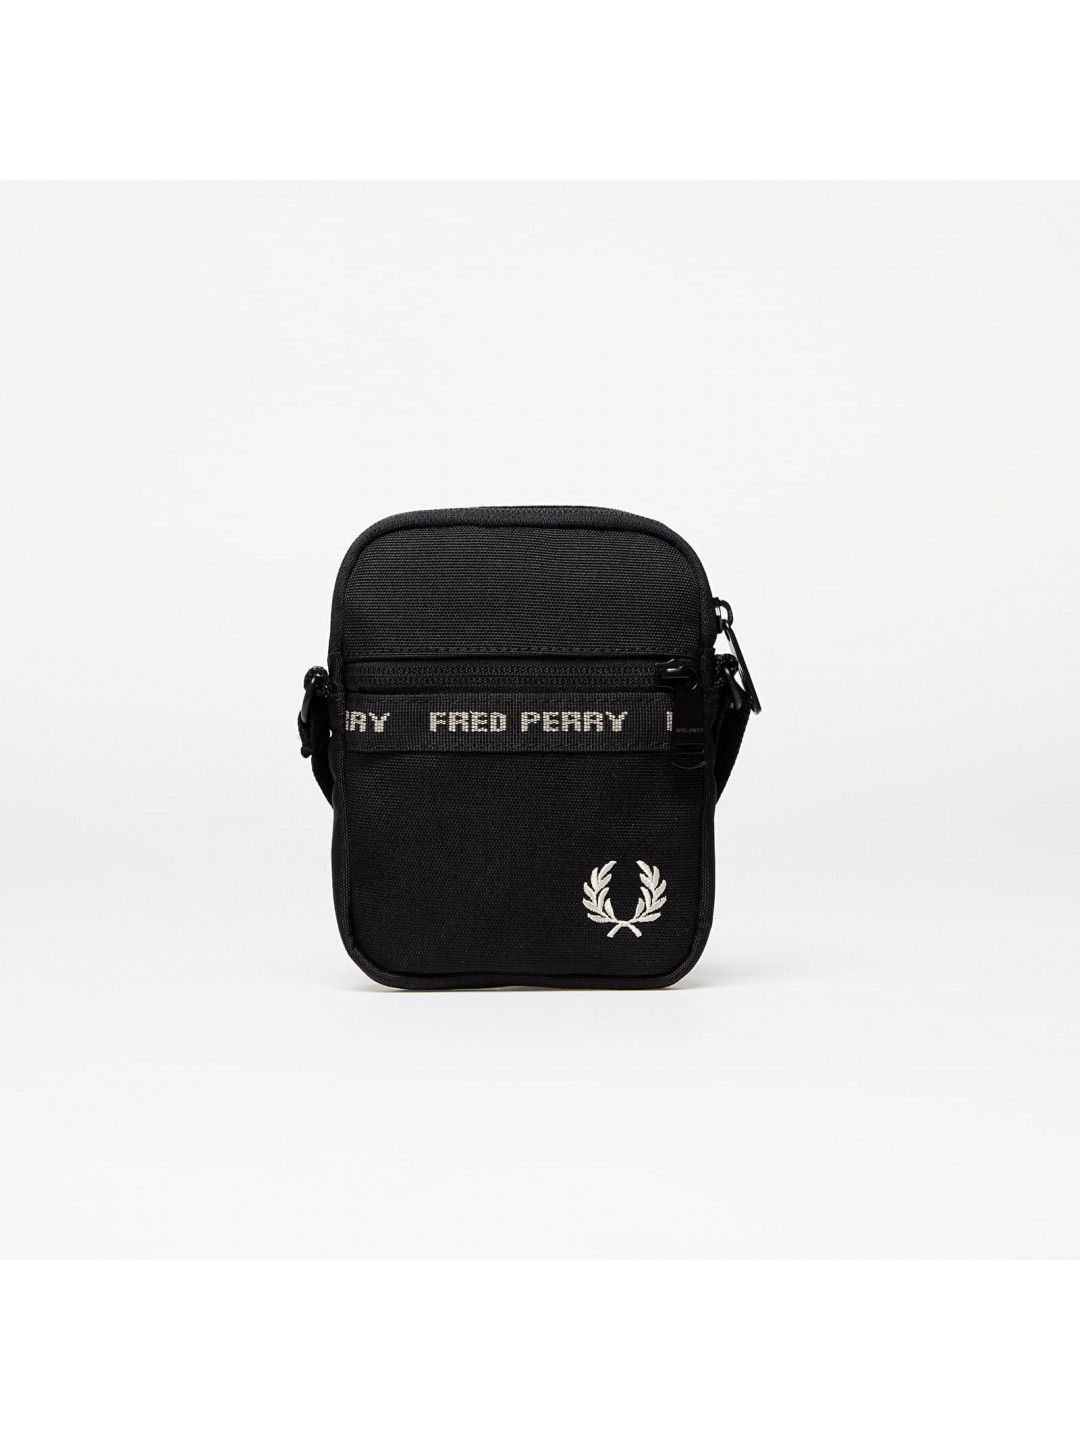 FRED PERRY Fp Taped Side Bag Black Warm Grey